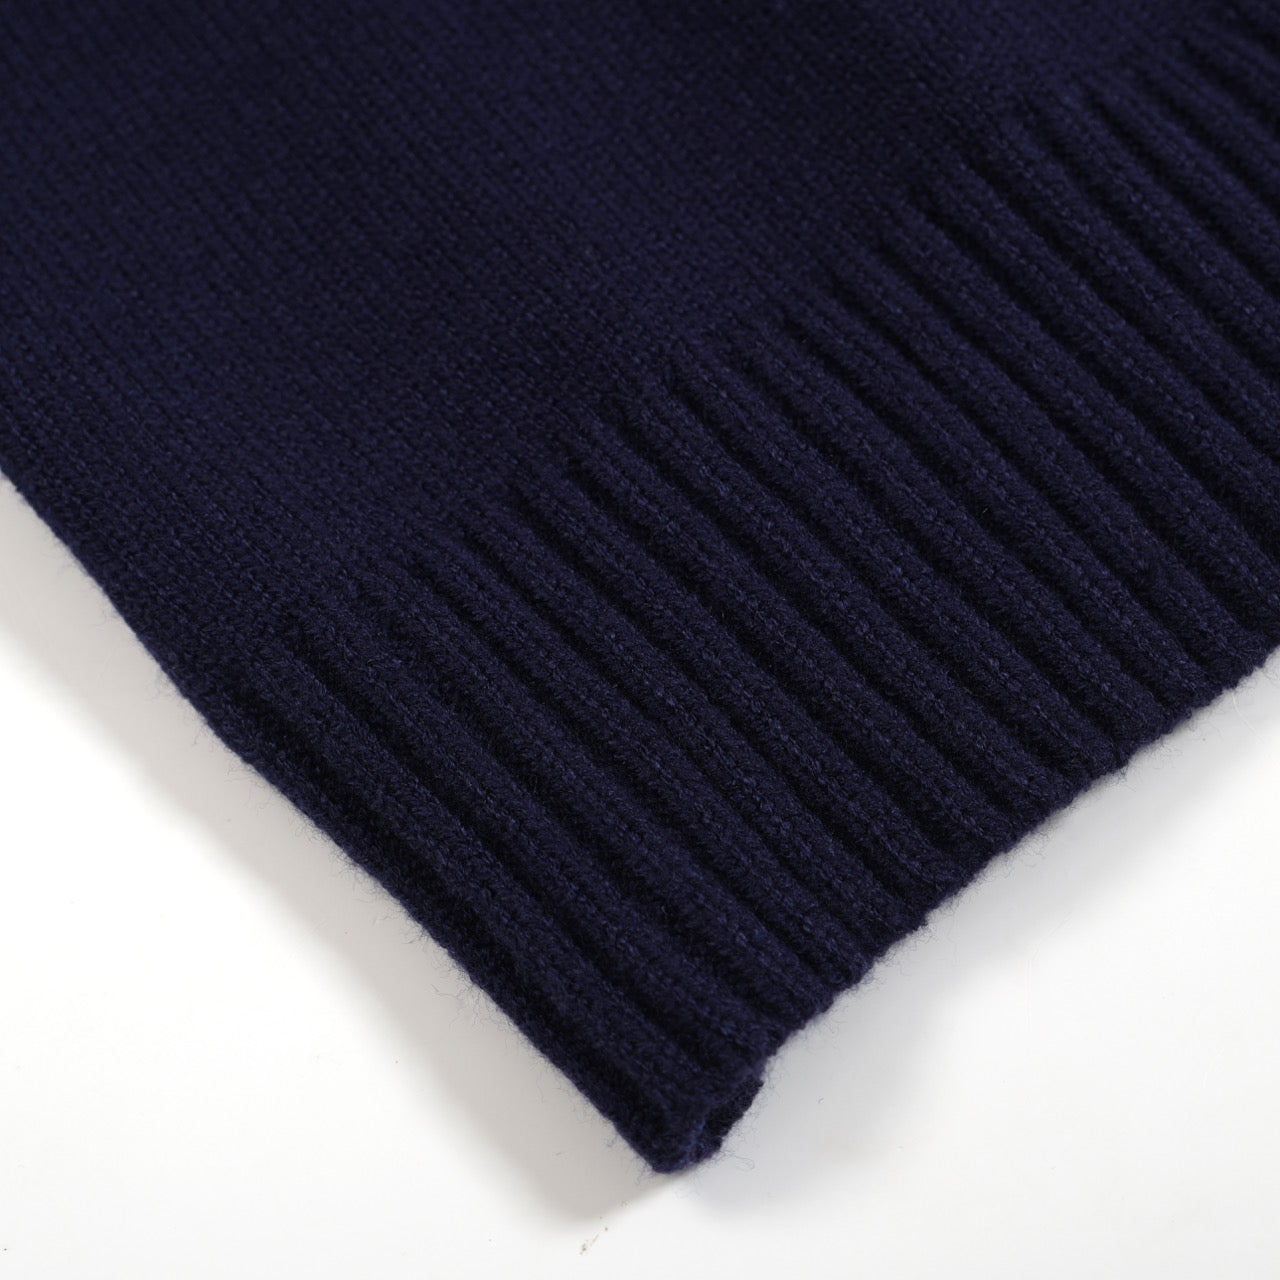 Men's Navy Blue Knitted Sweater With Chest Stripe Design